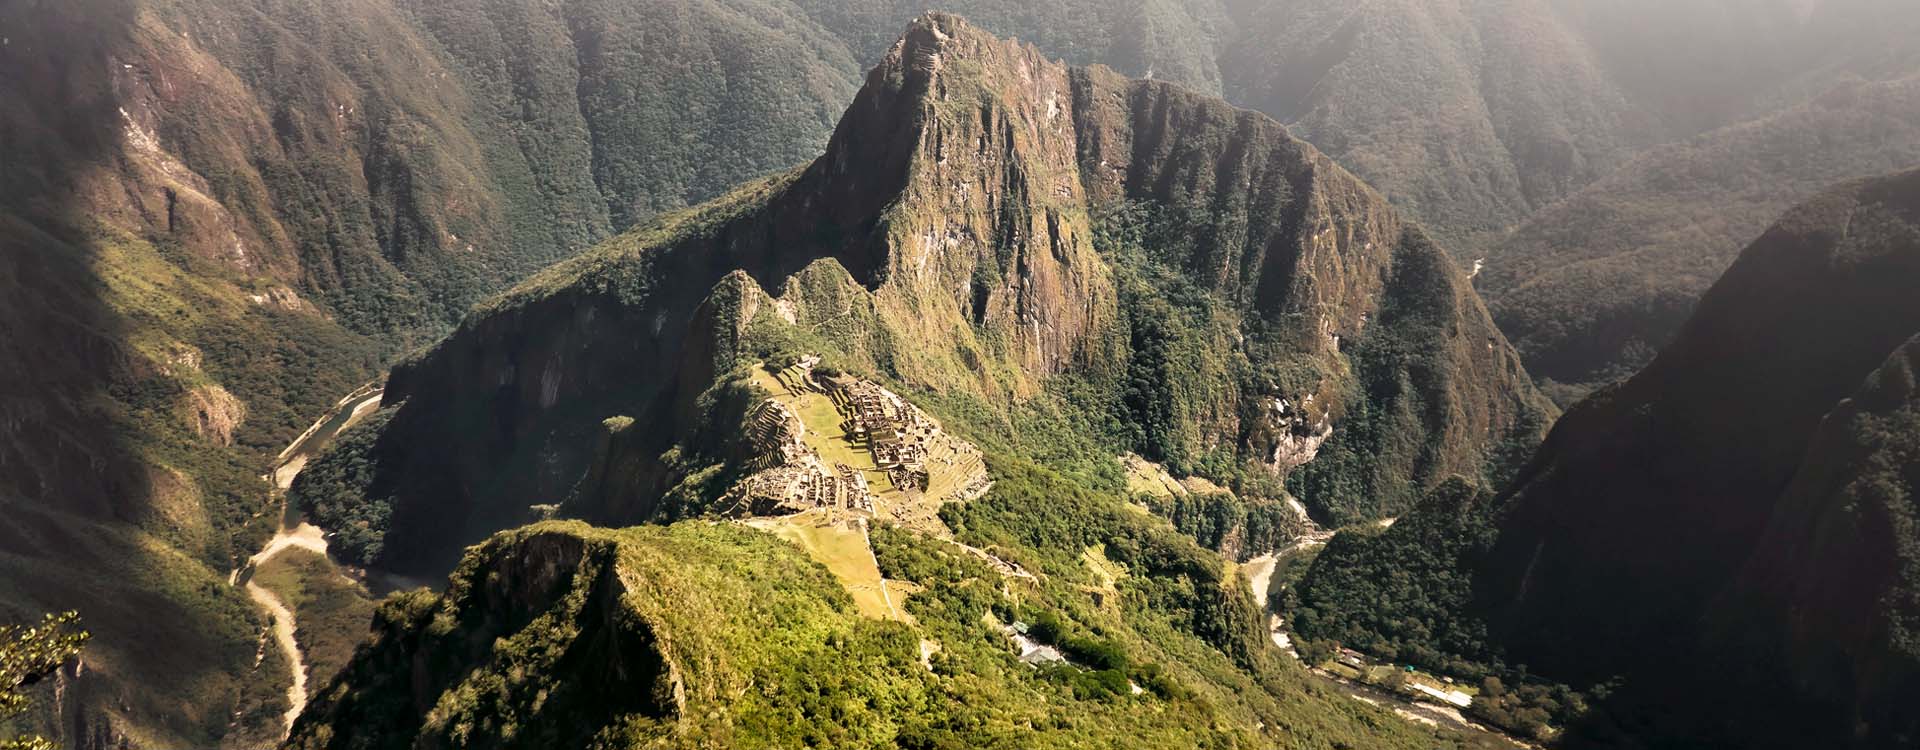 Information about the Machu Picchu Mountain - Sam Corporations